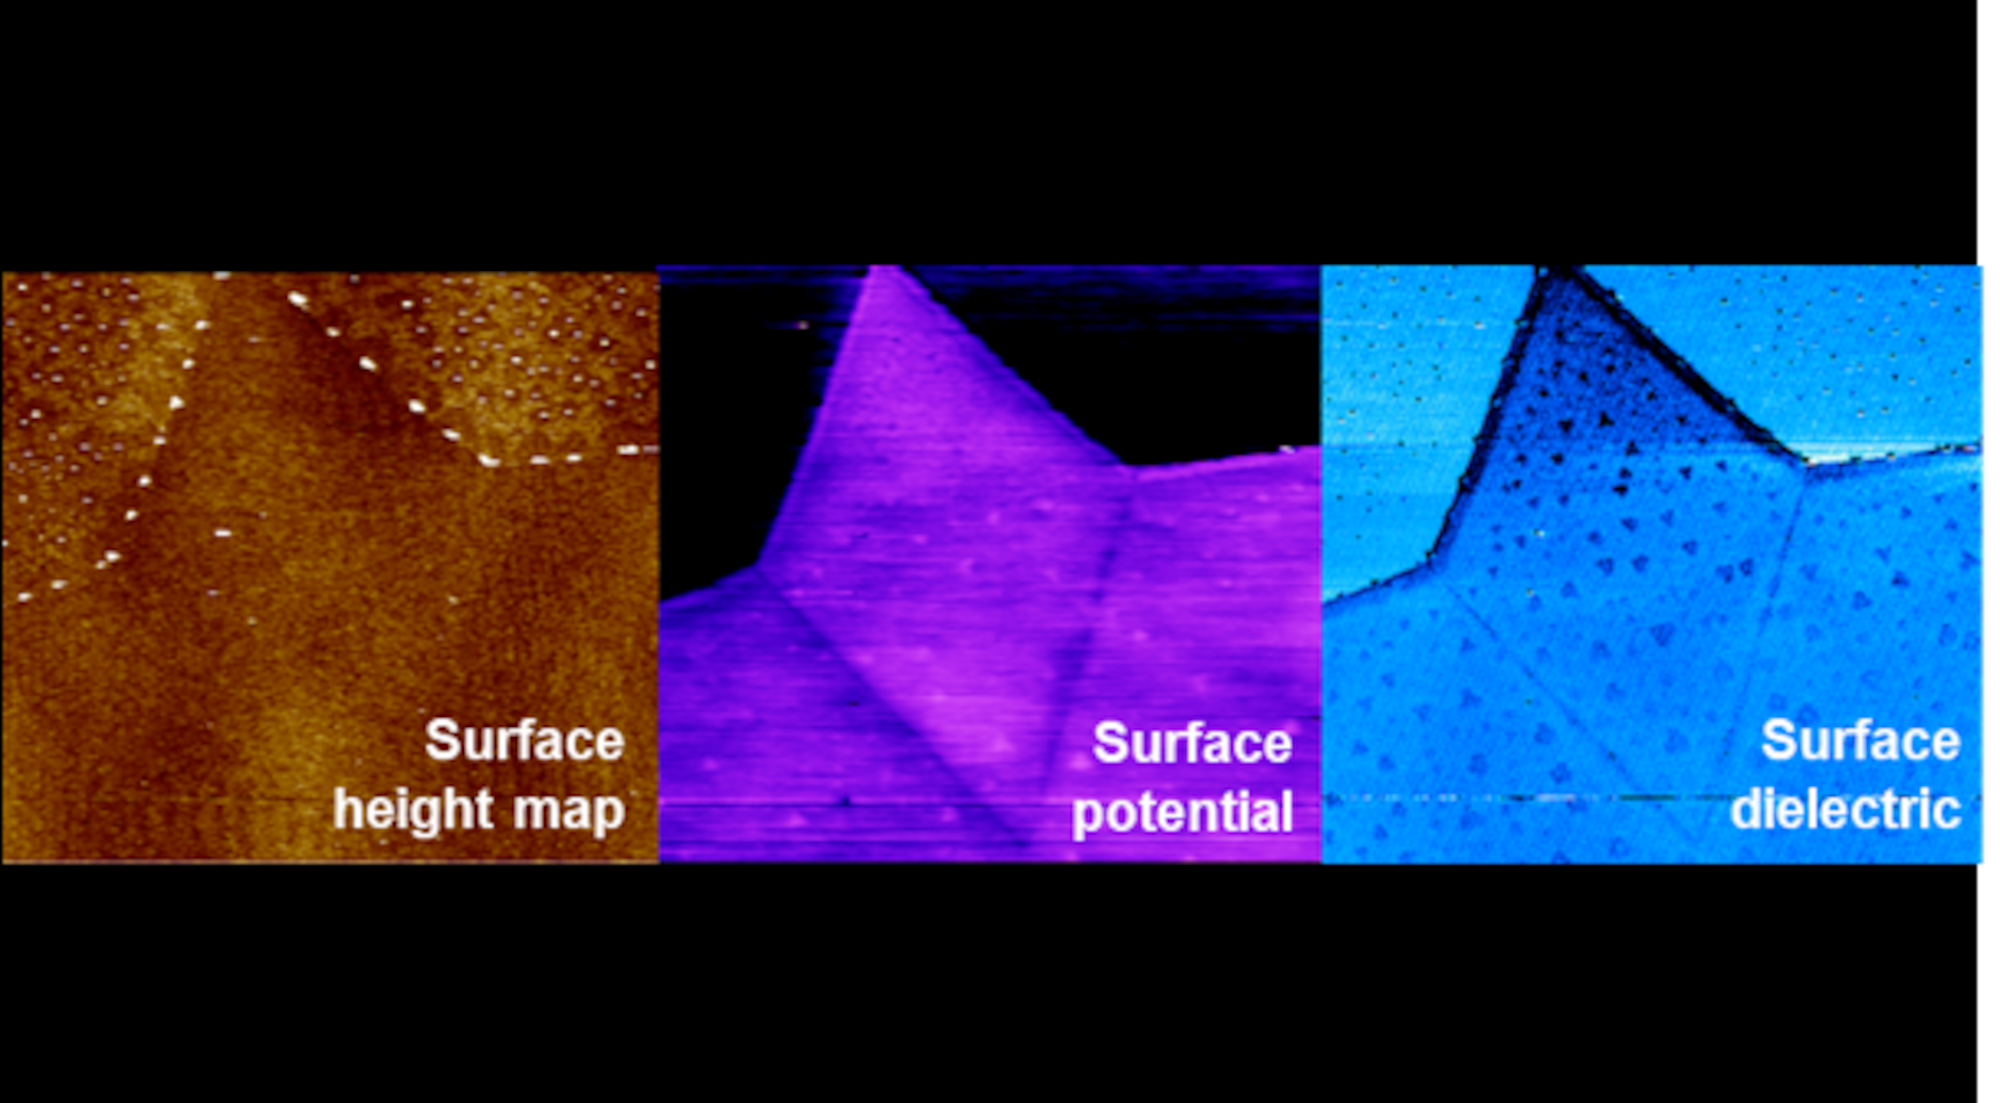 Atomic scale images (images are 40 micrometers x 40 micrometers) of surface height, surface potential and surface dielectric, in two-dimensional MoSe2 films, revealing many features invisible to traditional characterization methods. (U.S. Air Force photo/Spencer Deer)